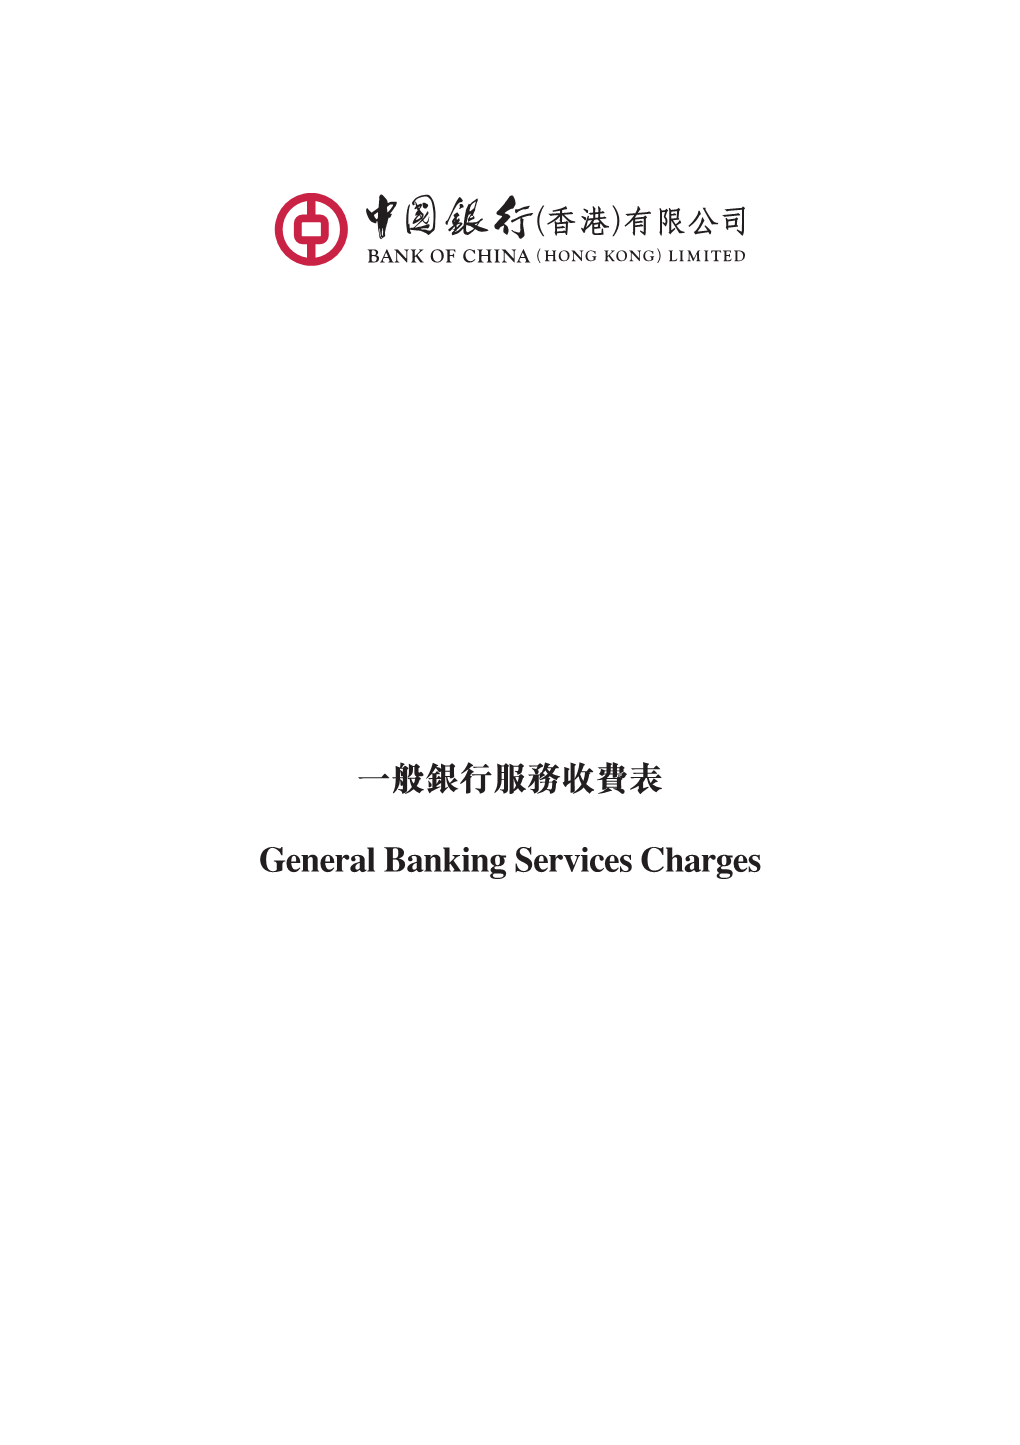 General Banking Services Charges